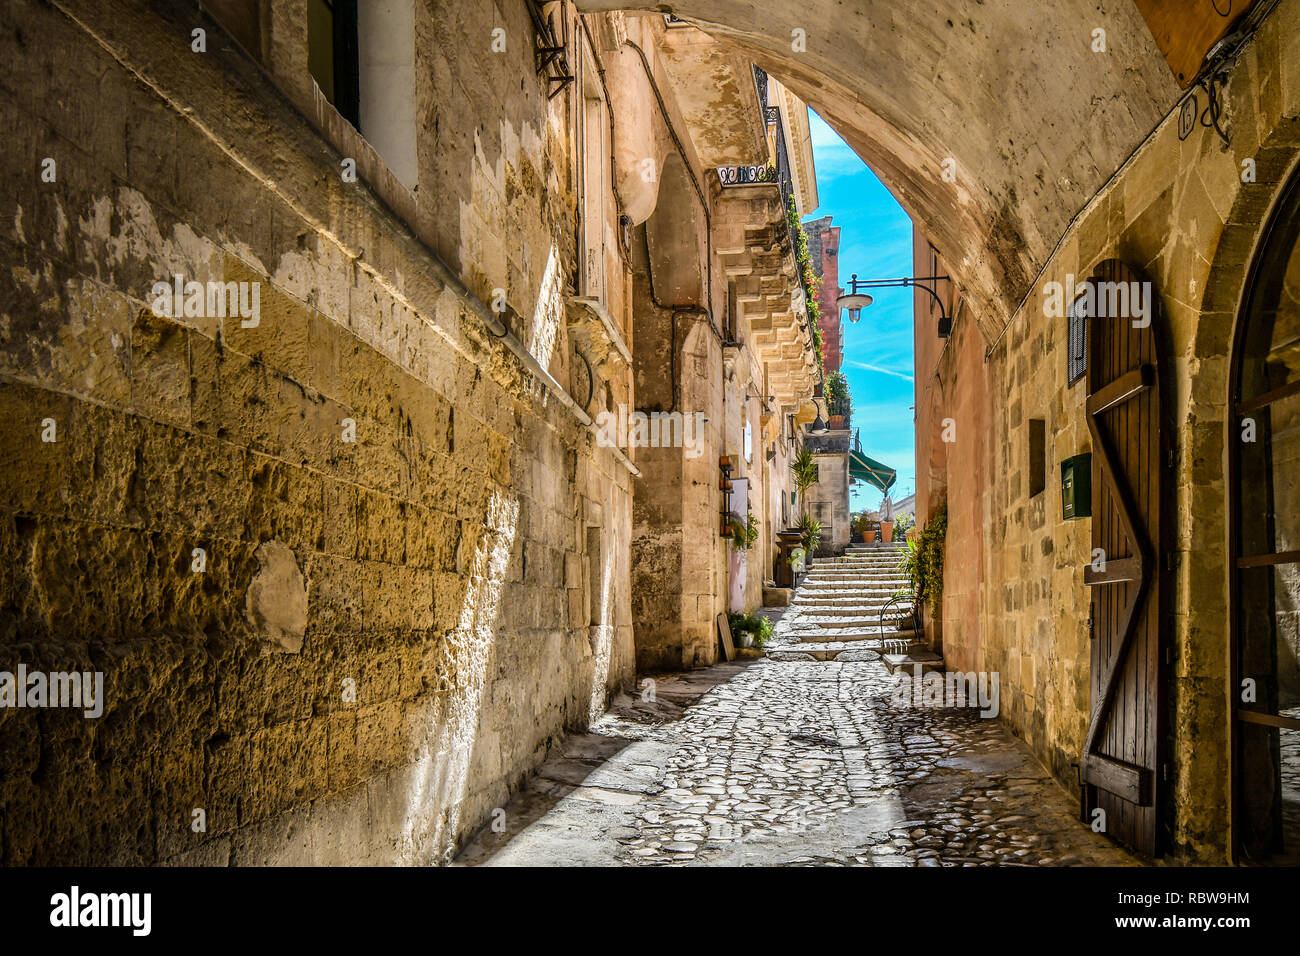 A covered alley leads to a cafe and piazza in the ancient city of Matera, Italy Stock Photo